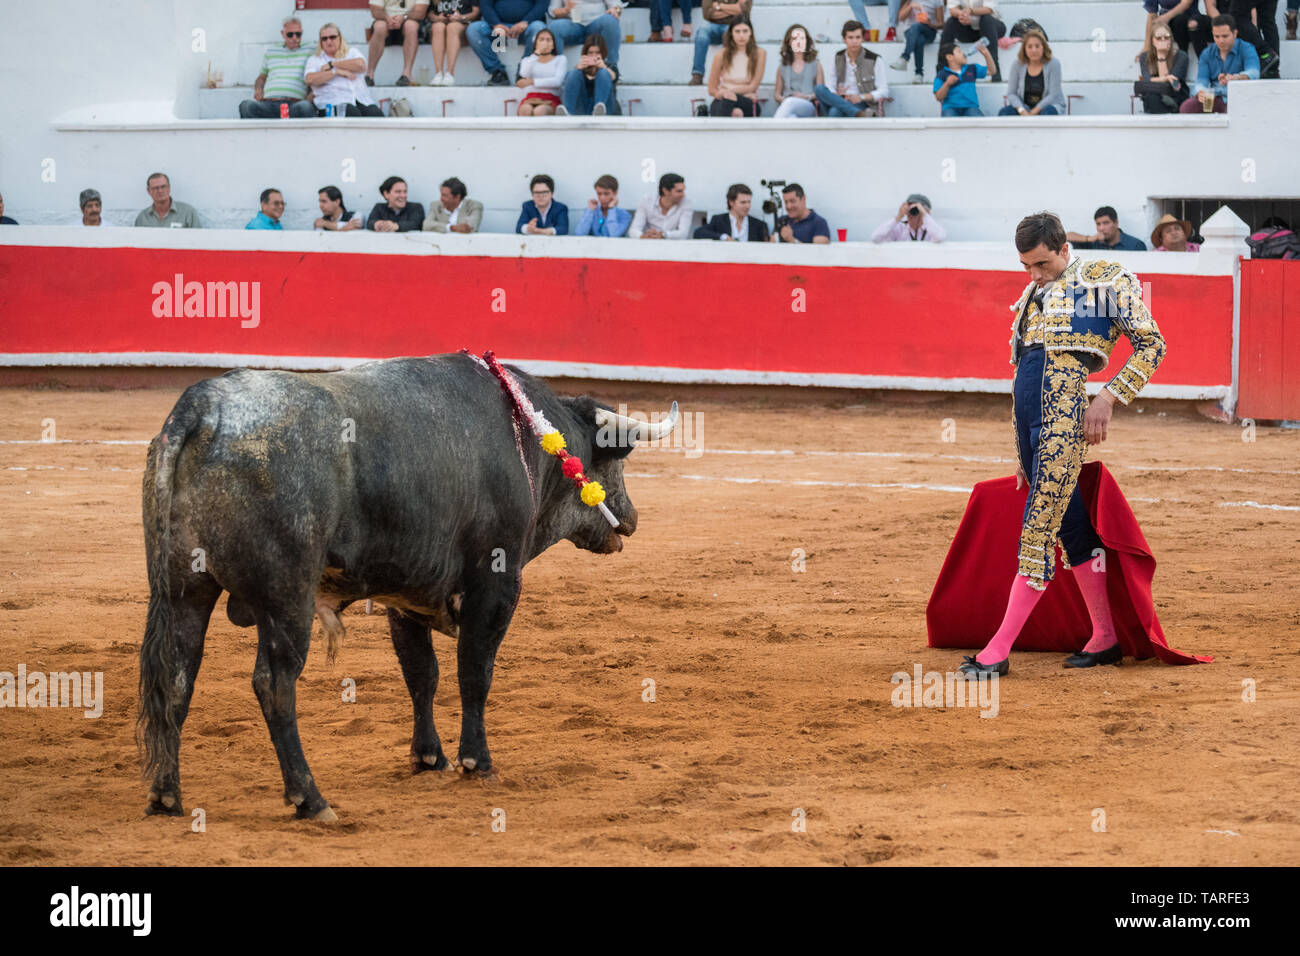 Spanish bullfighter Paco Urena performs with a bull at the Plaza de Toros bullring March 3, 2018 in San Miguel de Allende, Mexico. Stock Photo